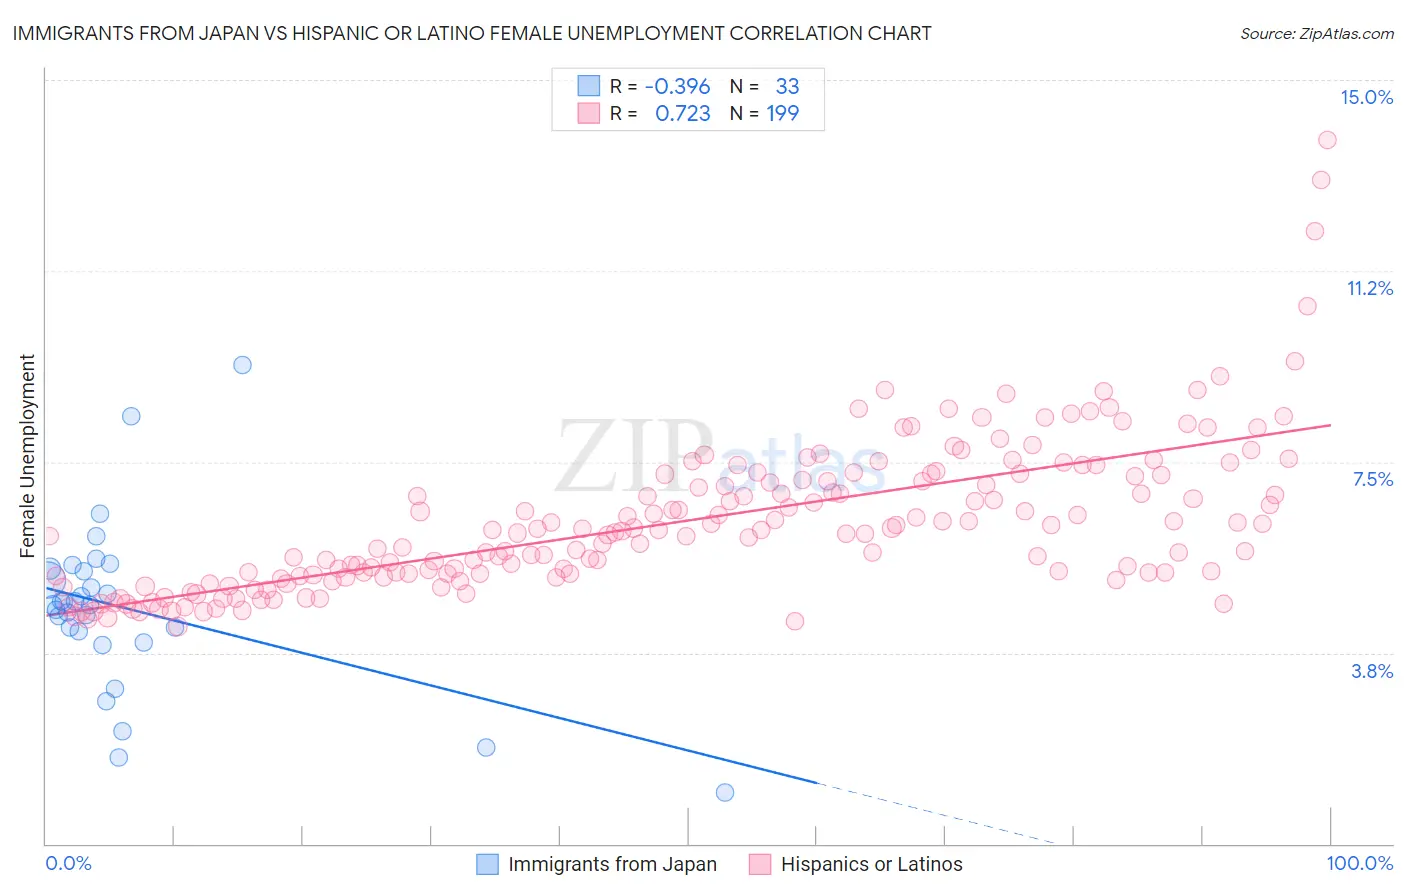 Immigrants from Japan vs Hispanic or Latino Female Unemployment